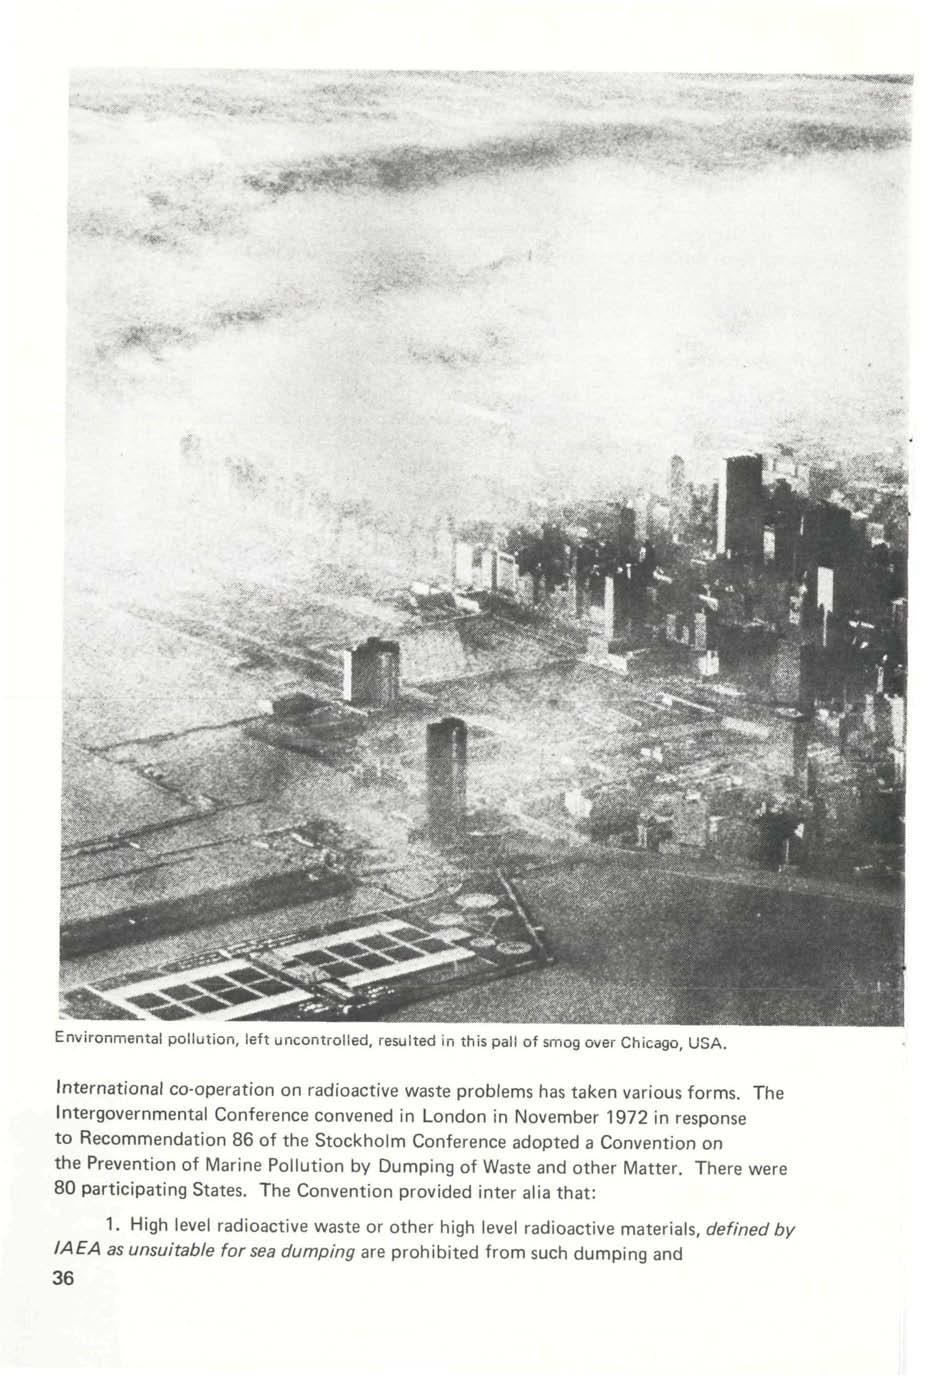 Environmental pollution, left uncontrolled, resulted in this pall of smog over Chicago, USA. International co-operation on radioactive waste problems has taken various forms.